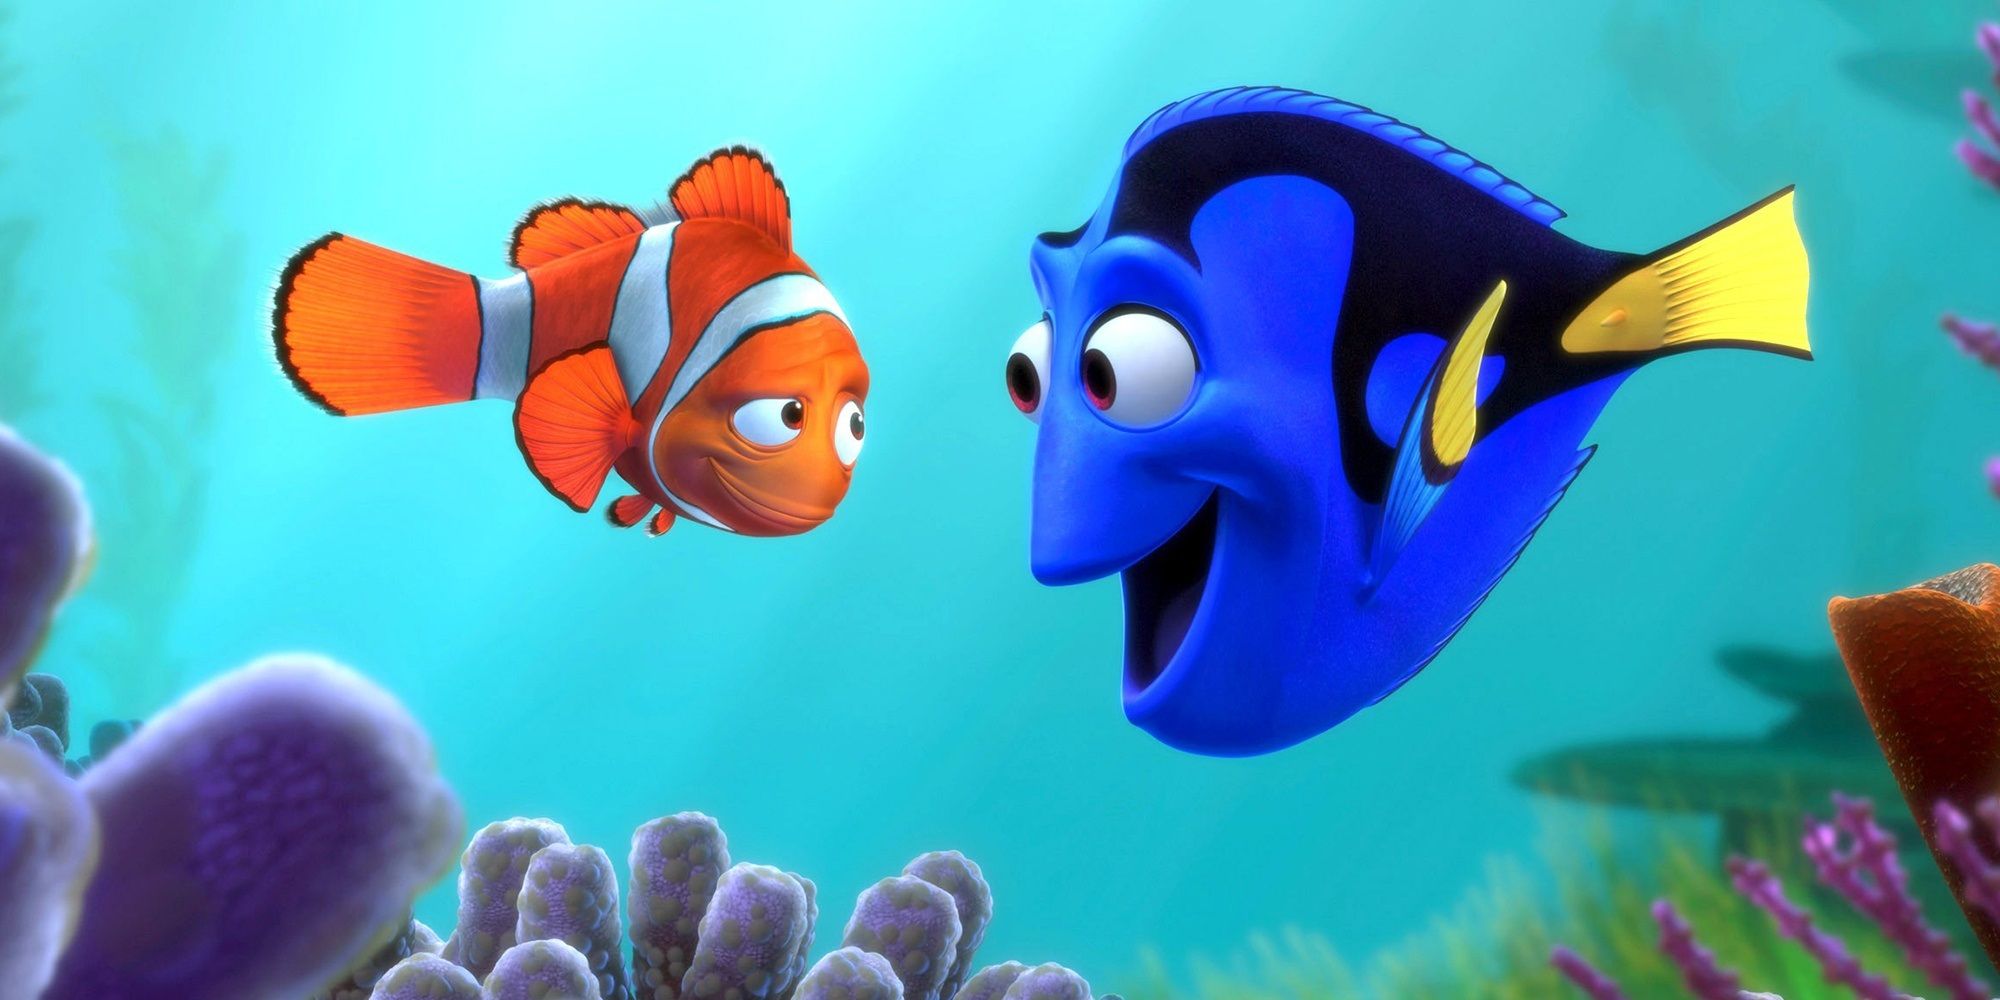 Finding Nemo - Marlene and Dory looking at each other